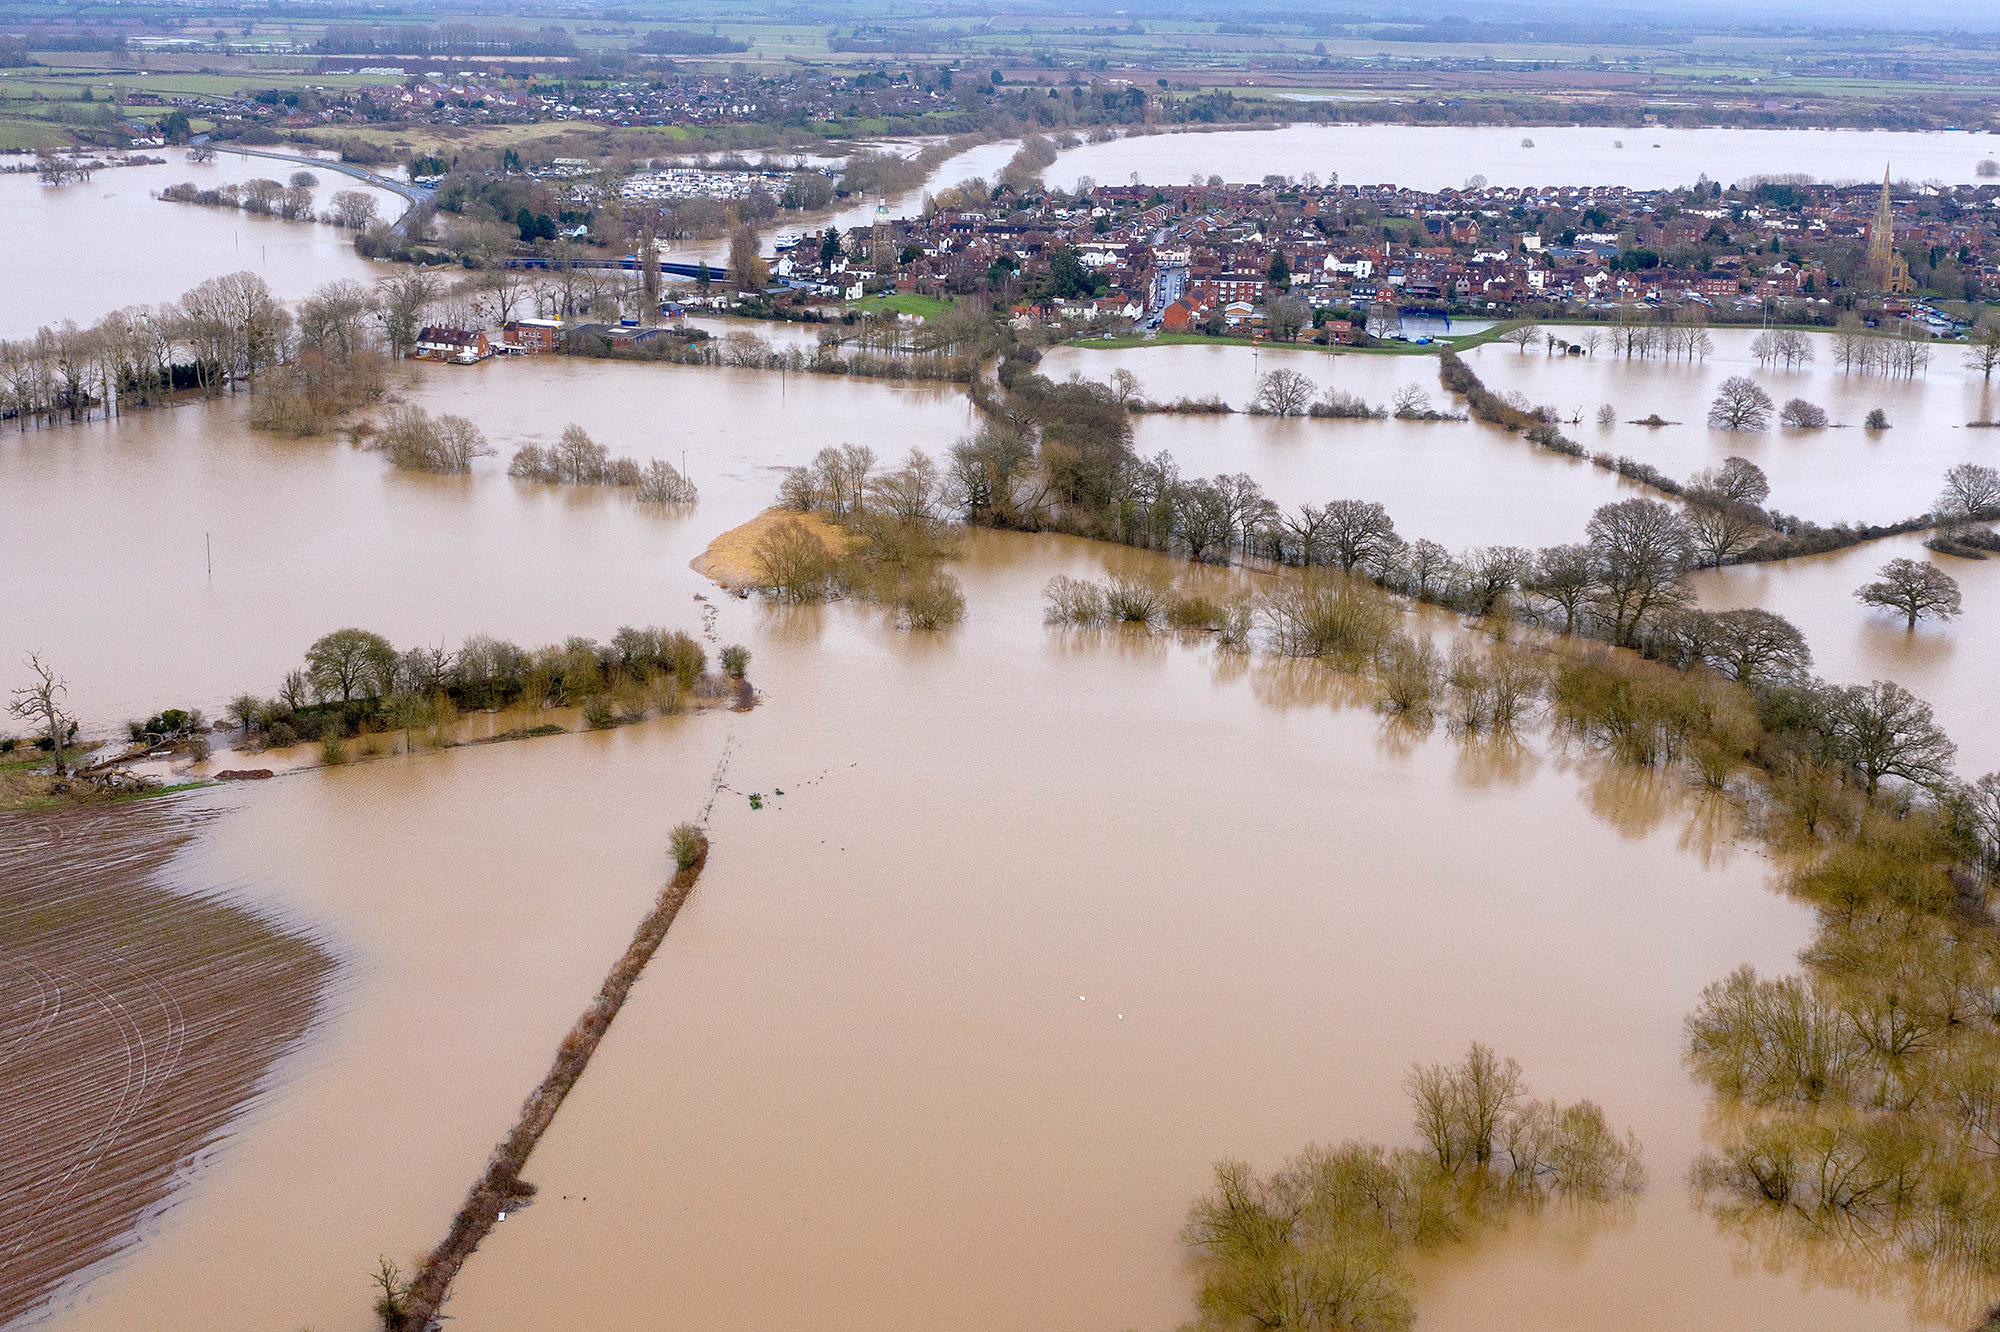 Flooding in Upton upon Seven, UK, in 2020.